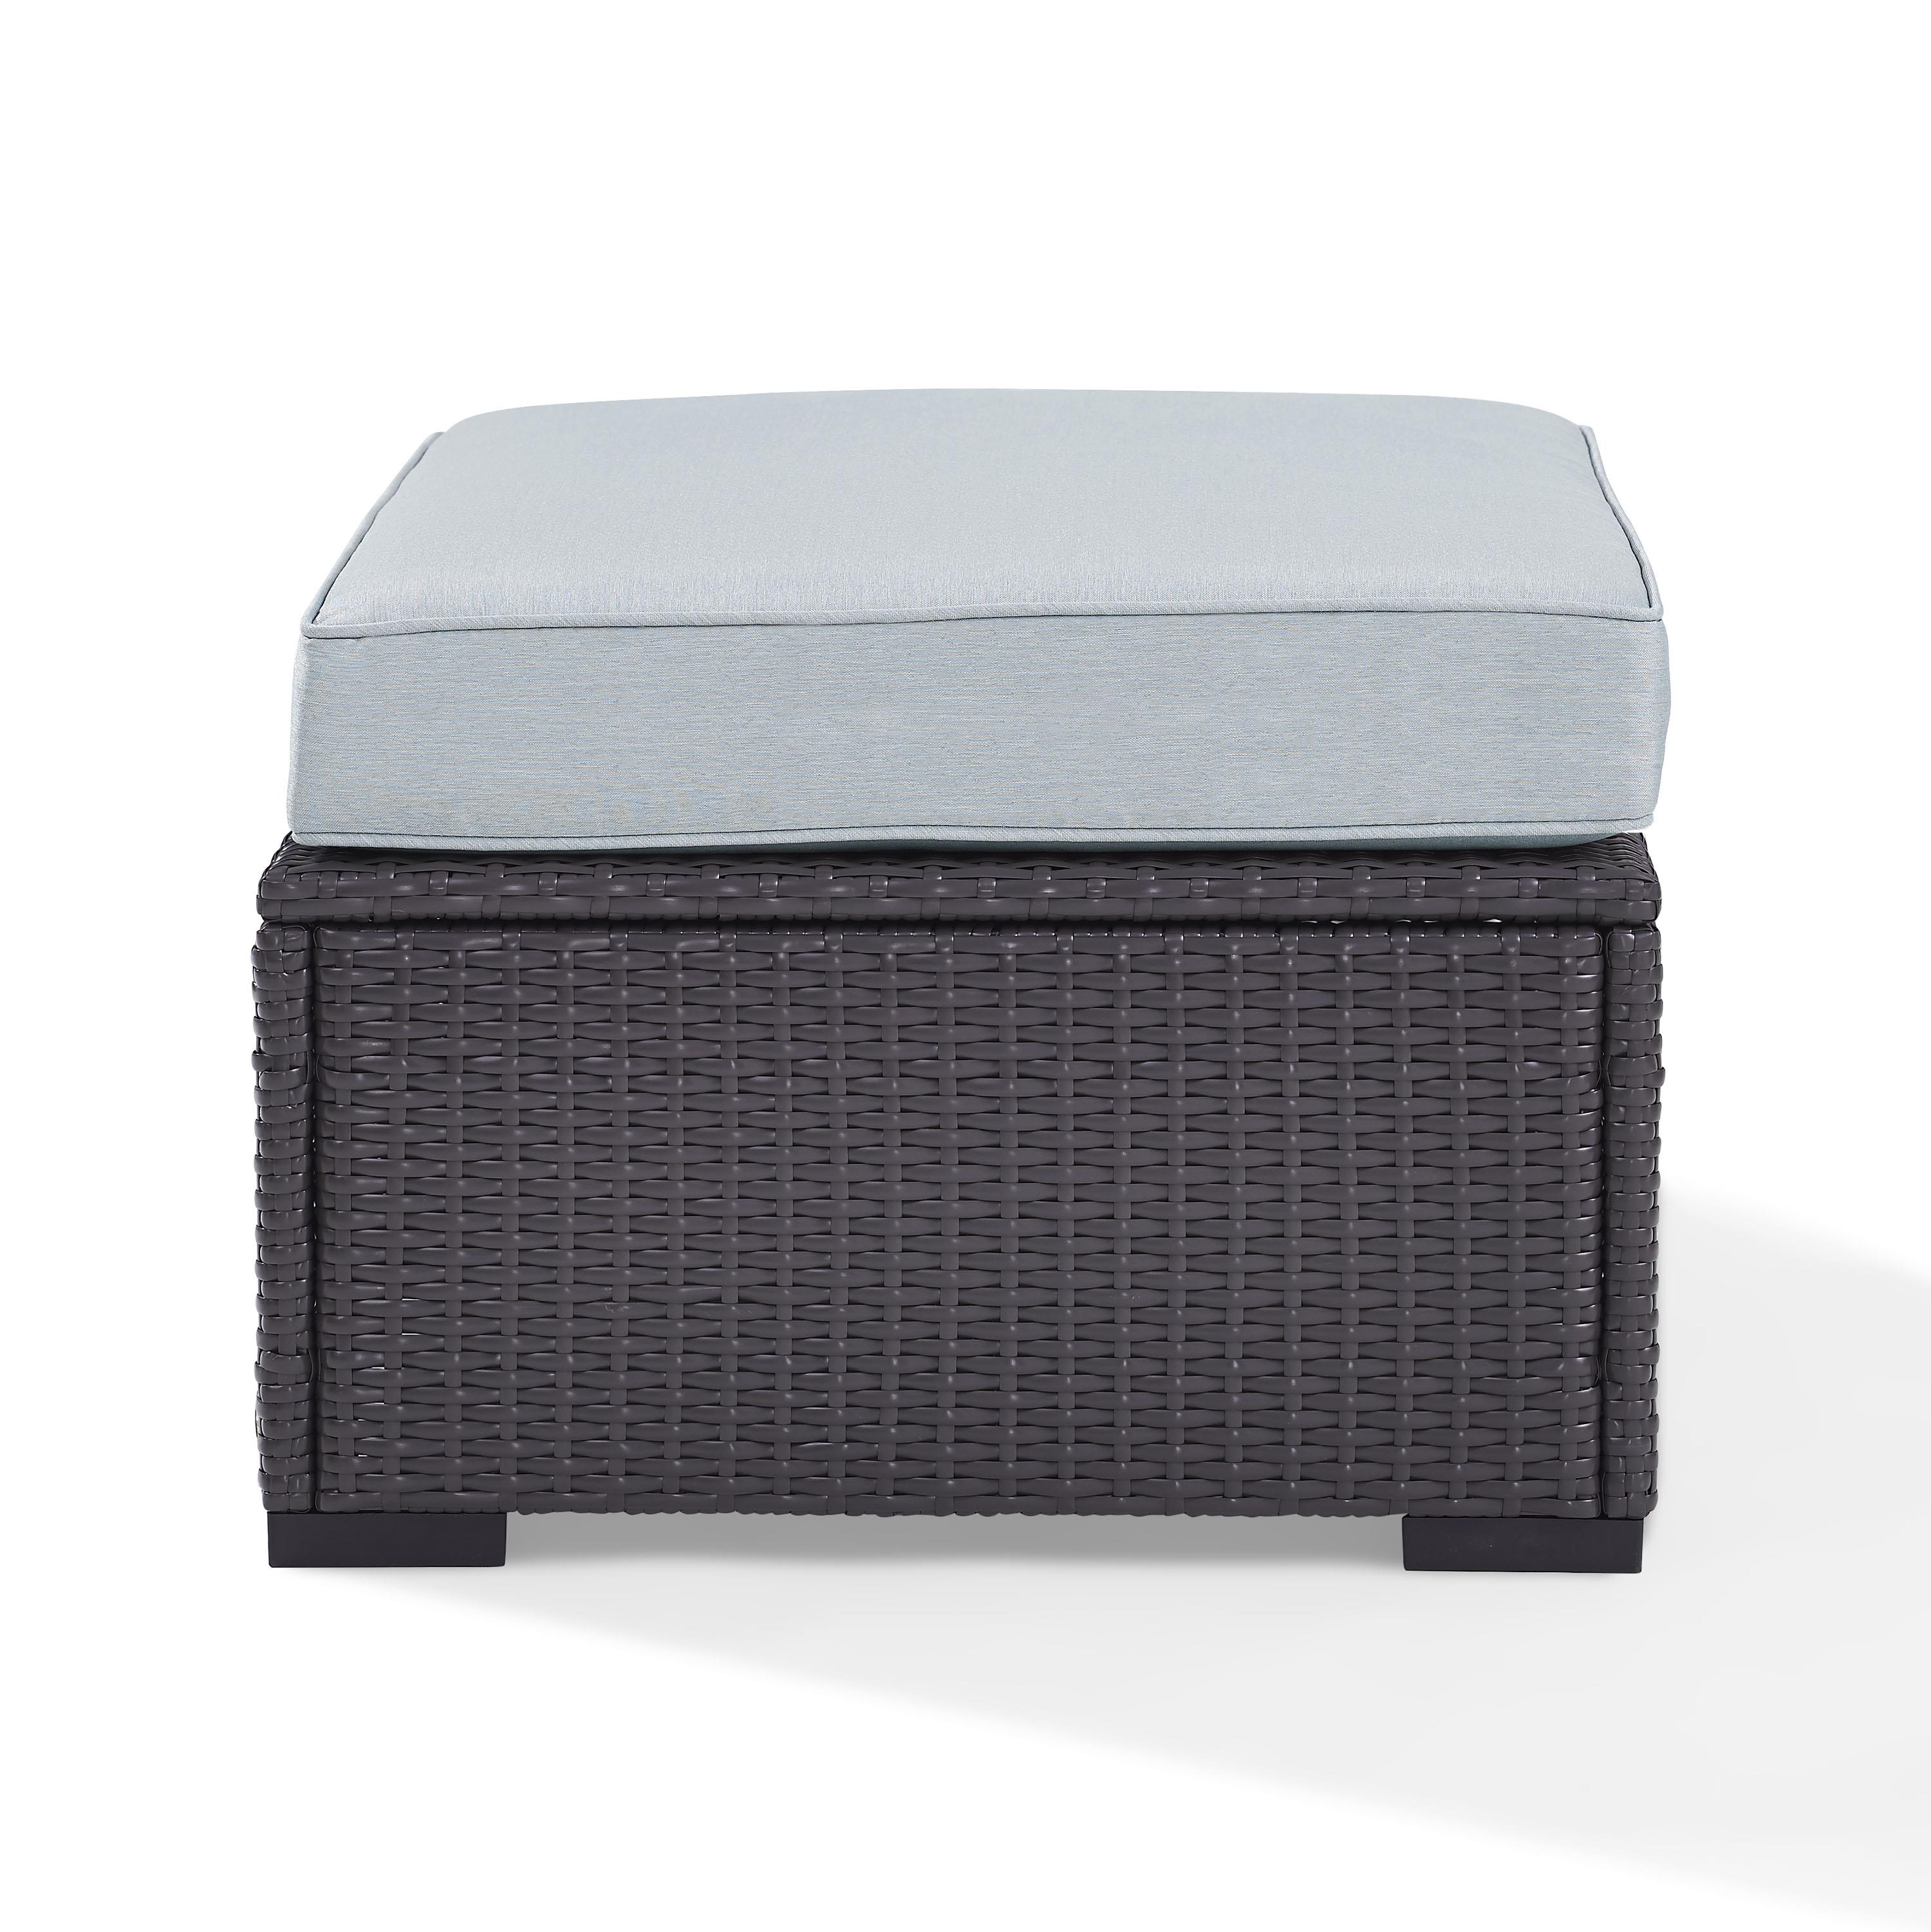 Crosley Biscayne Outdoor Wicker Ottoman White/Brown-Color:Brown,Style:Midst Cushions - image 2 of 5